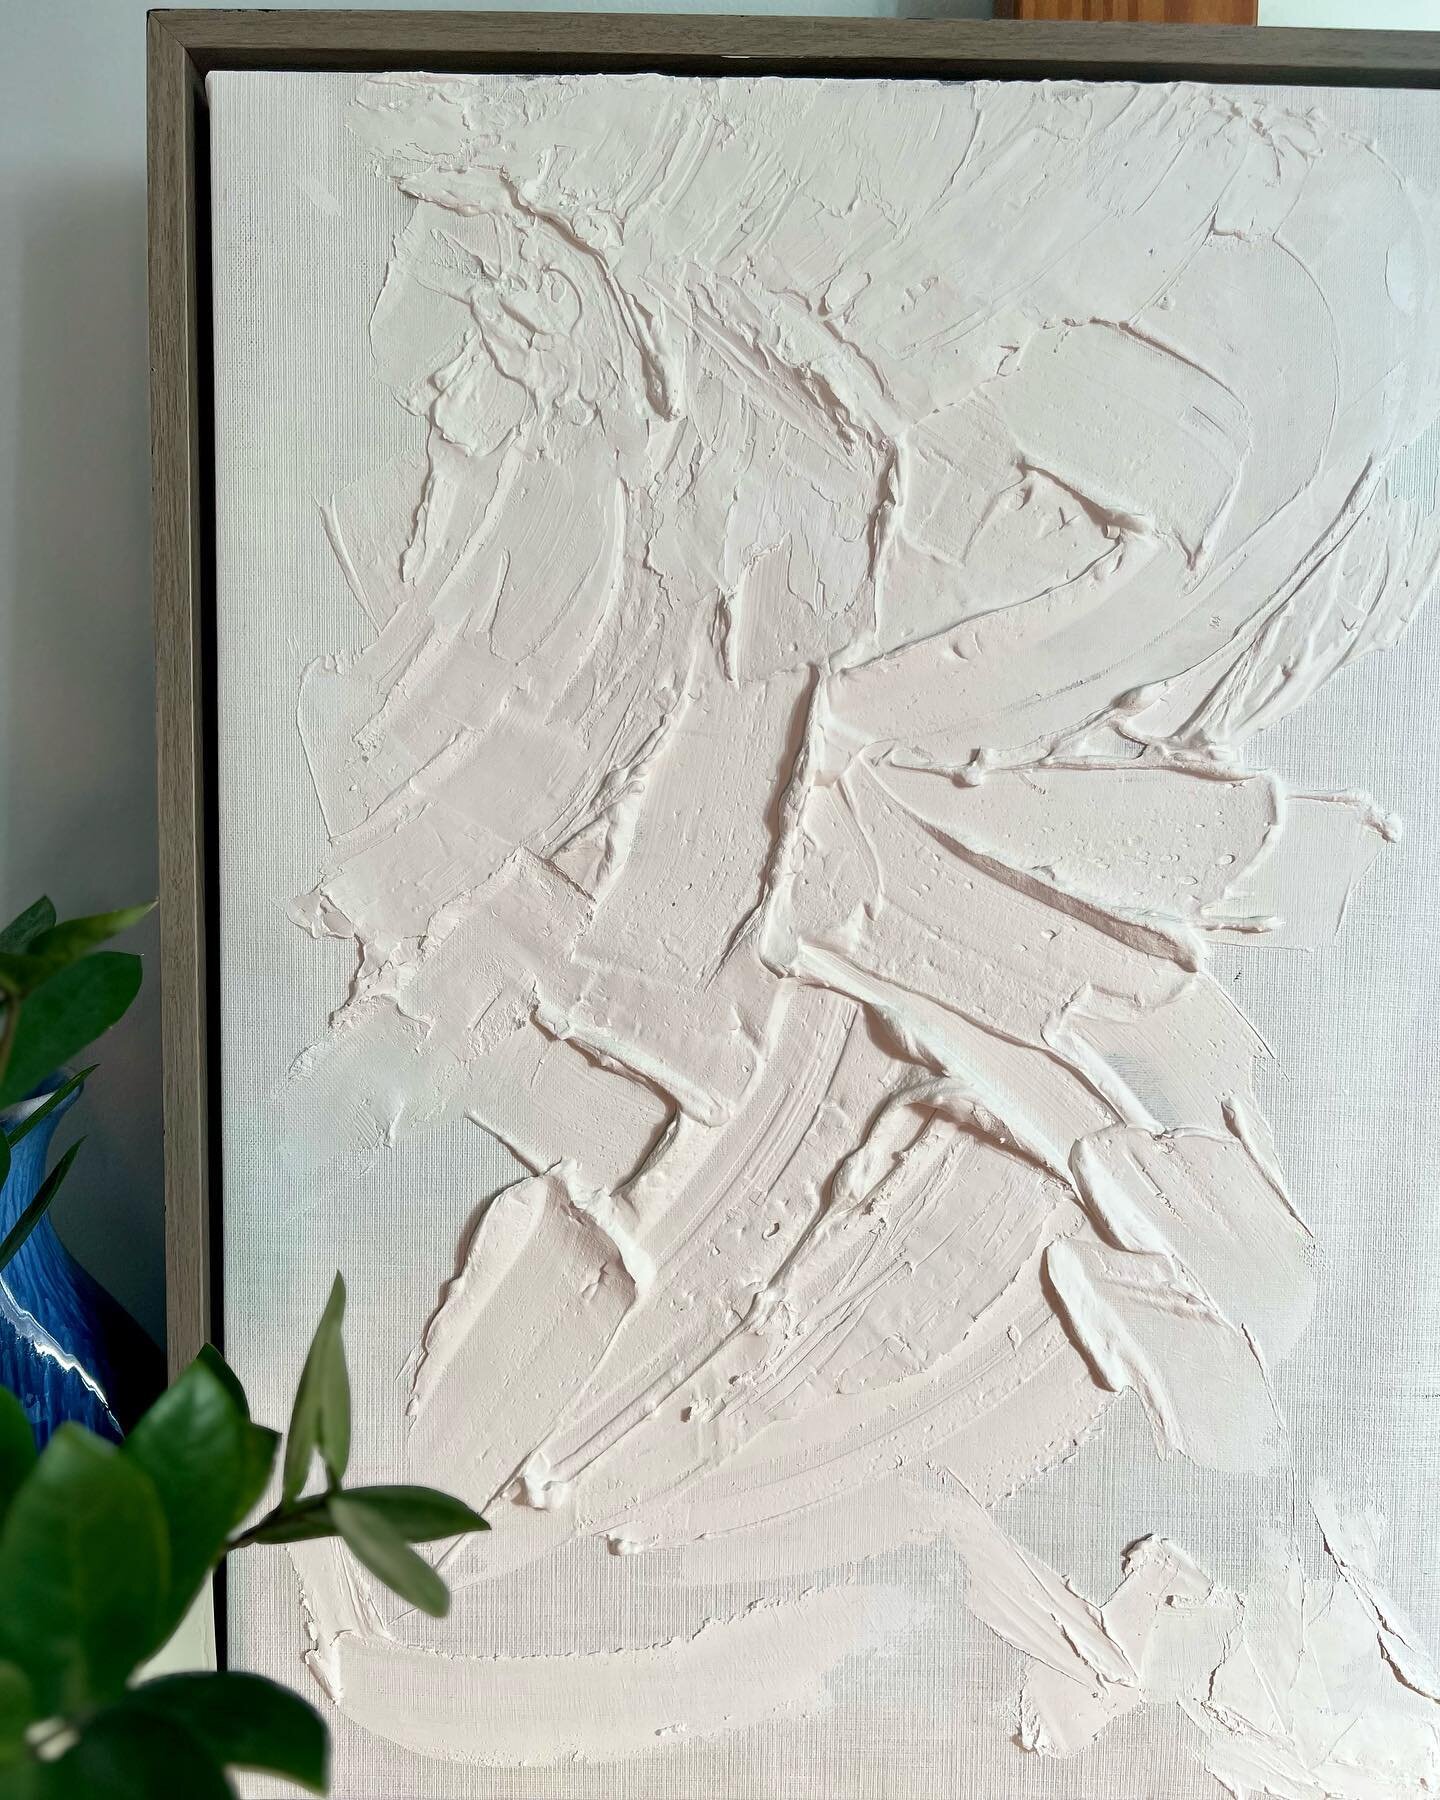 some other beginning's end. 
16.5&rdquo; 22.5&rdquo; | plaster on unknown canvas from goodwill 

#abstractart #abstractpainting #texture #texturedpainting #phillyart #phillyartist #upcycledartwork